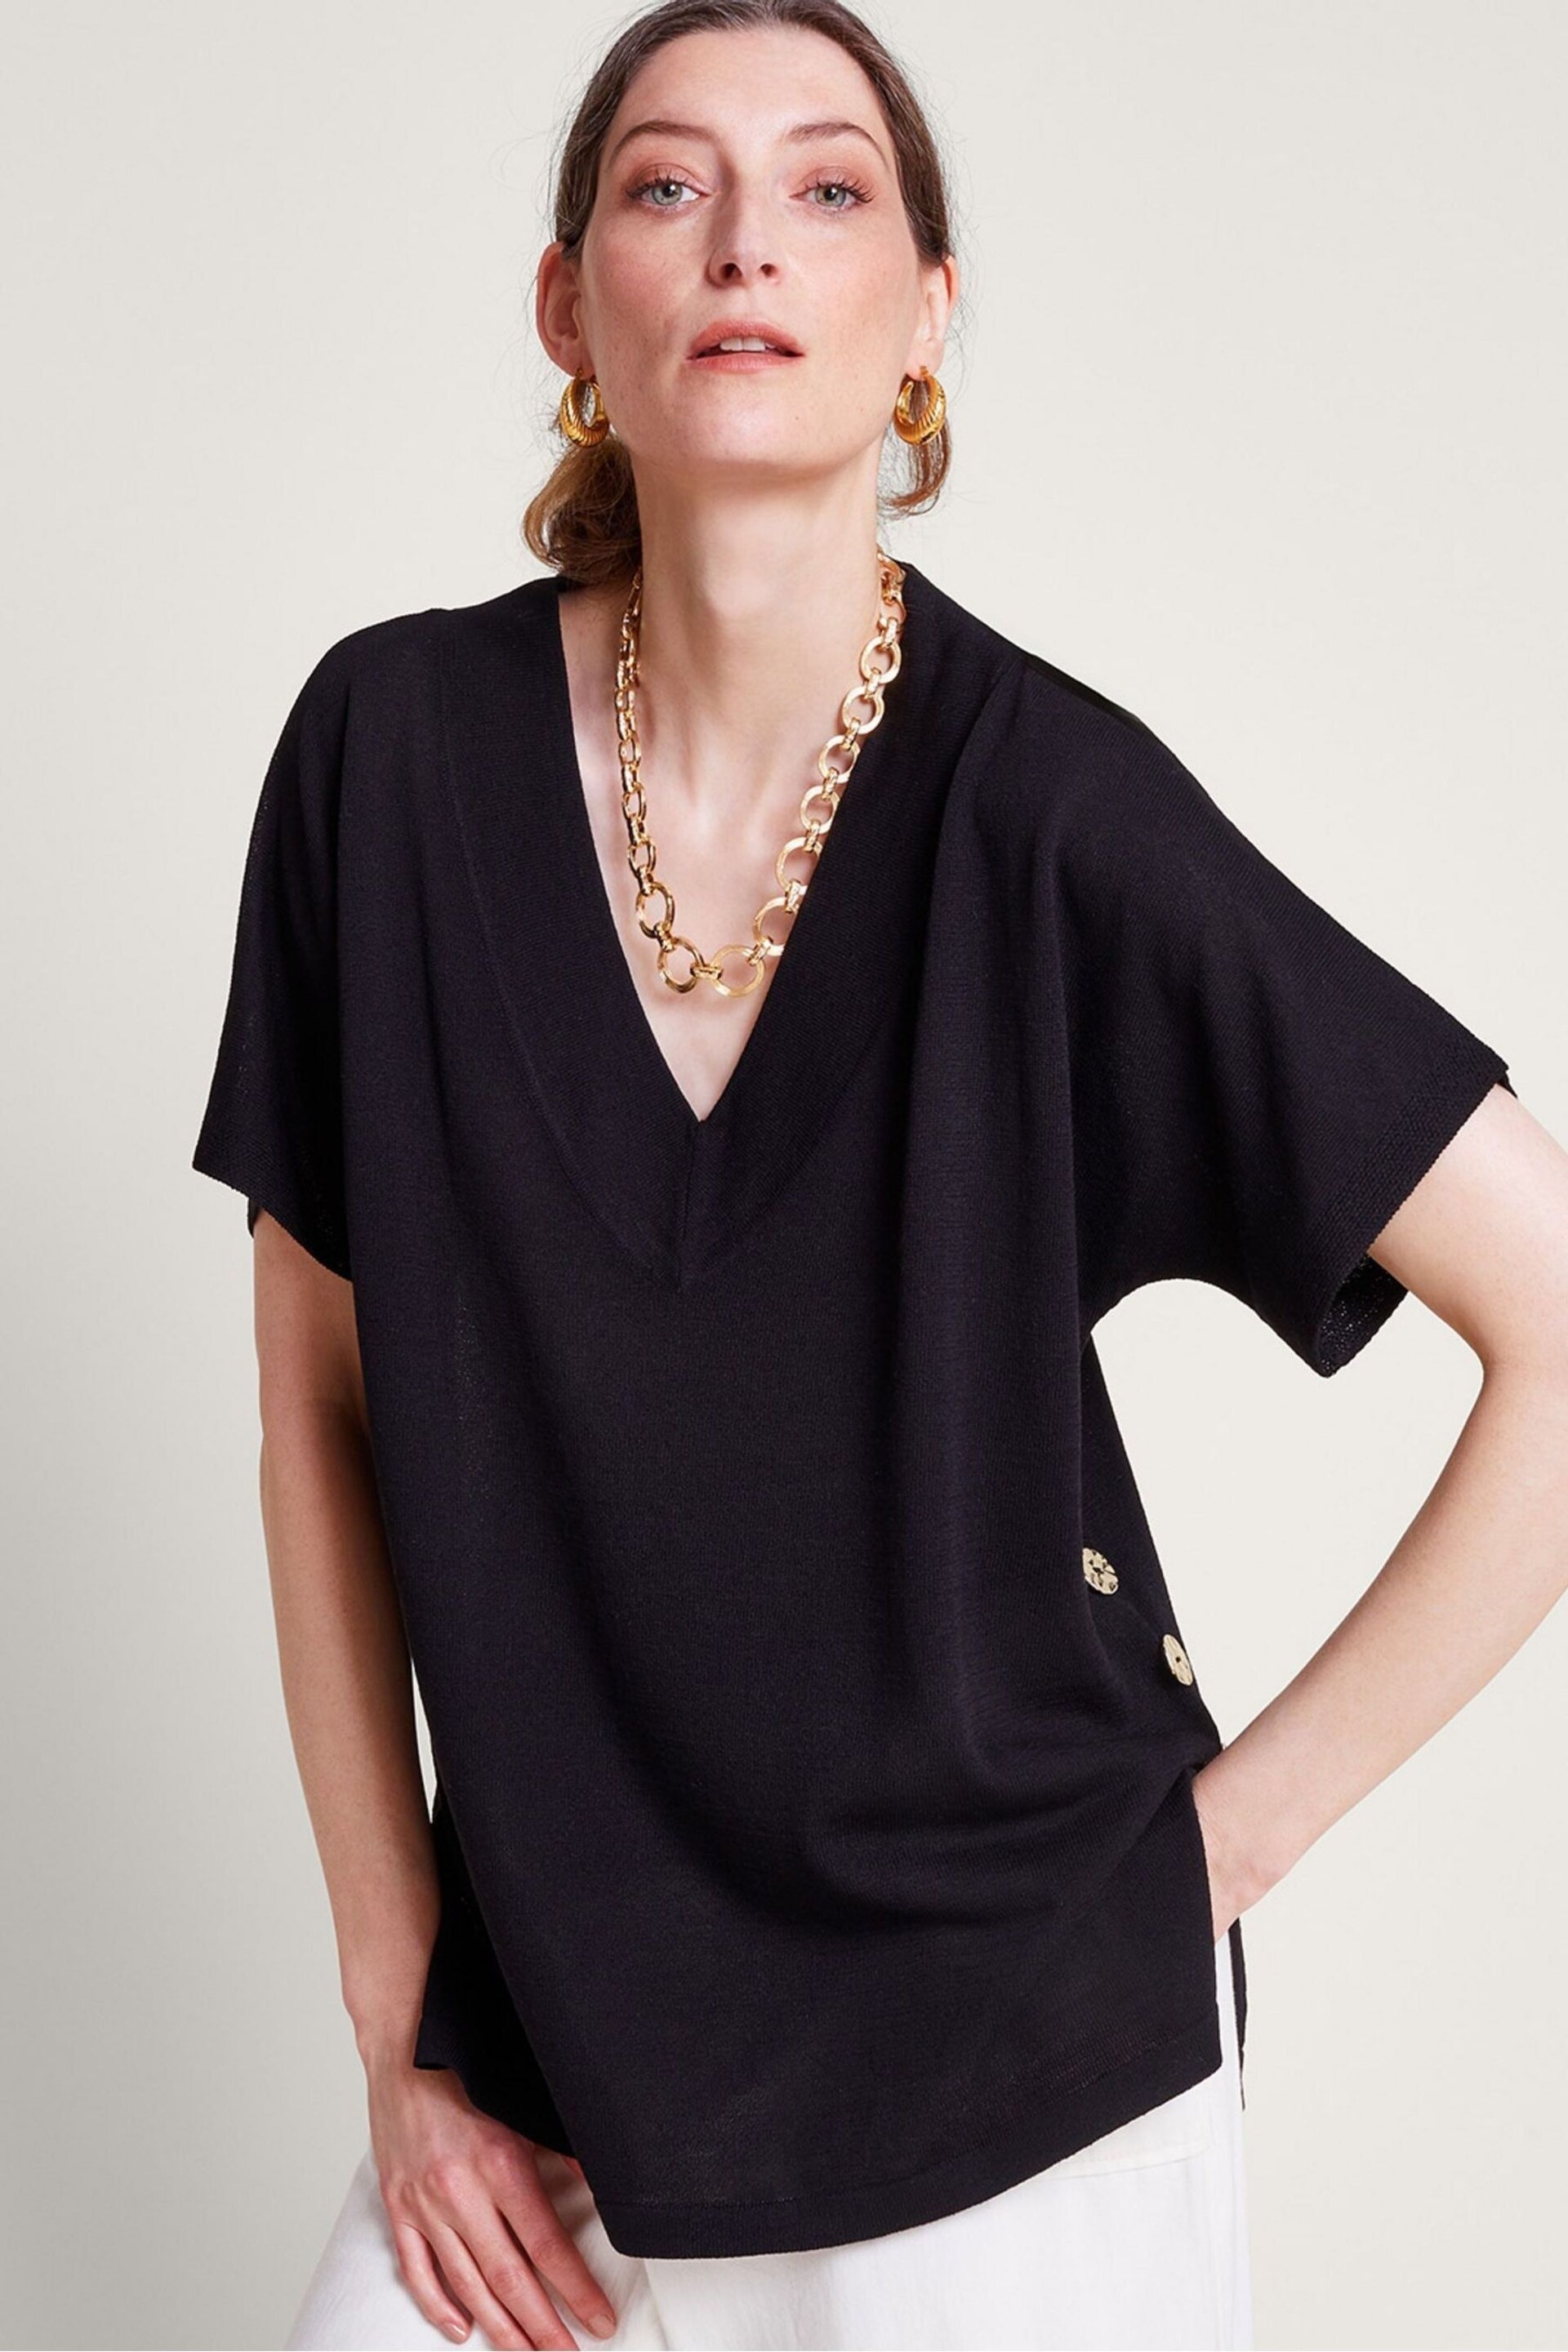 Monsoon Black Bel Button Knit Top - Image 1 of 4